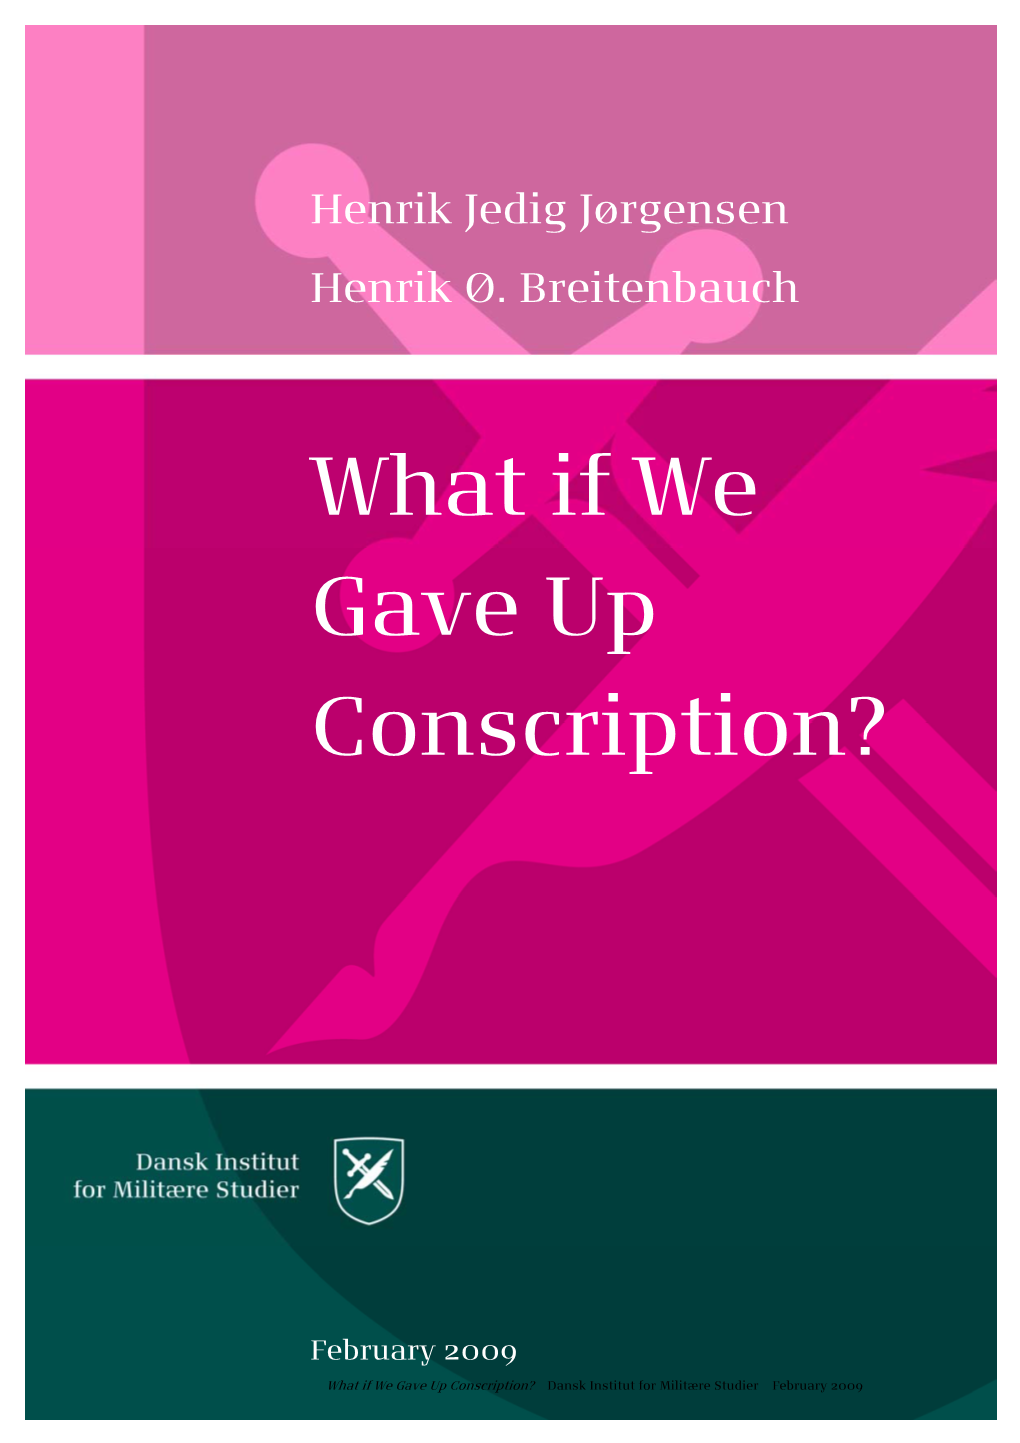 What If We Gave up Conscription?